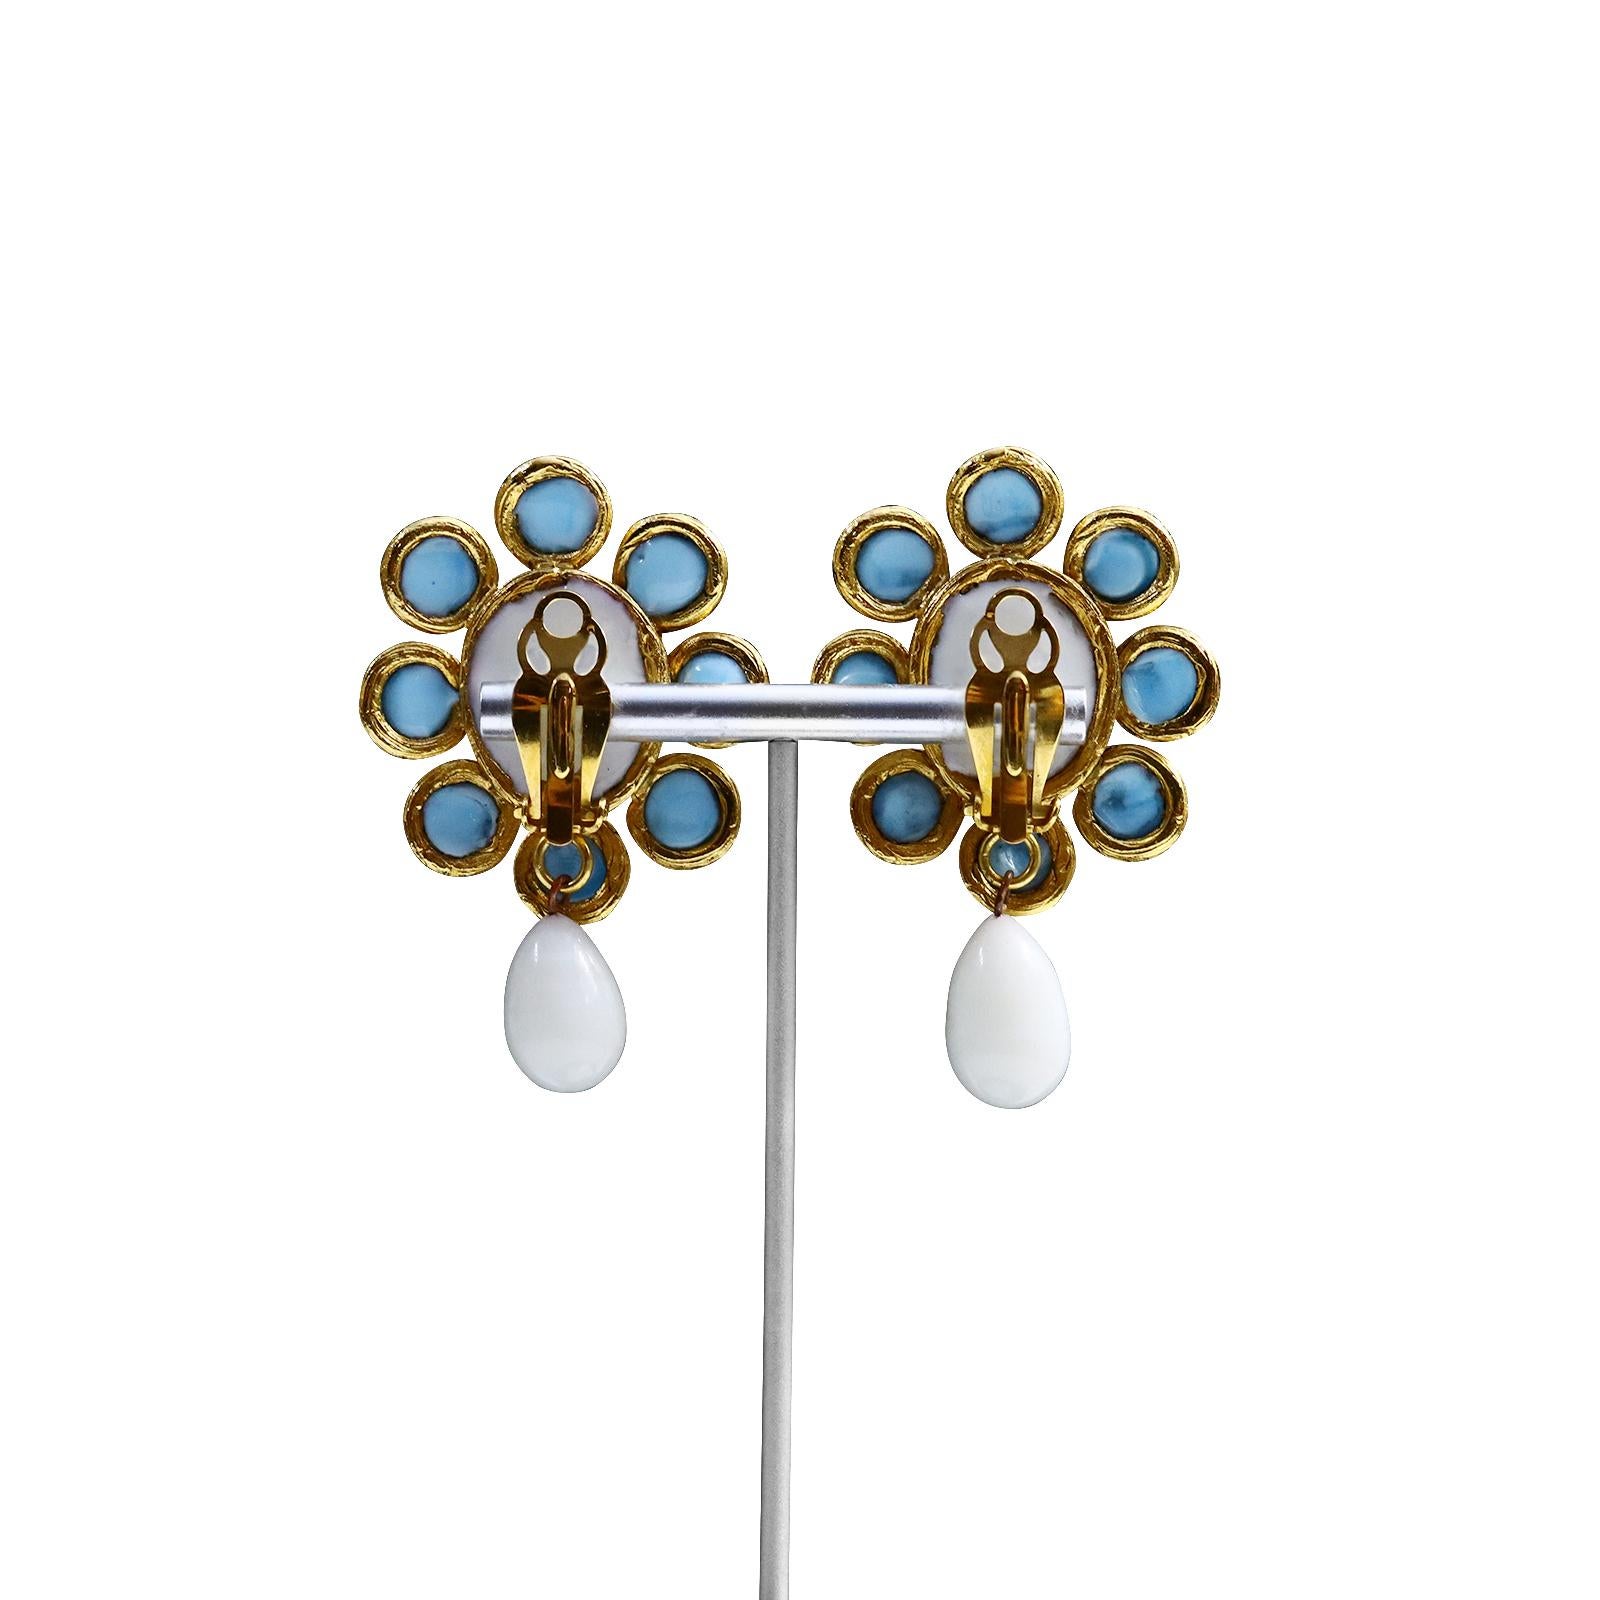 Maison Gripoix Vintage Faux Turquoise and White Dangling Earrings Circa 1980s For Sale 4